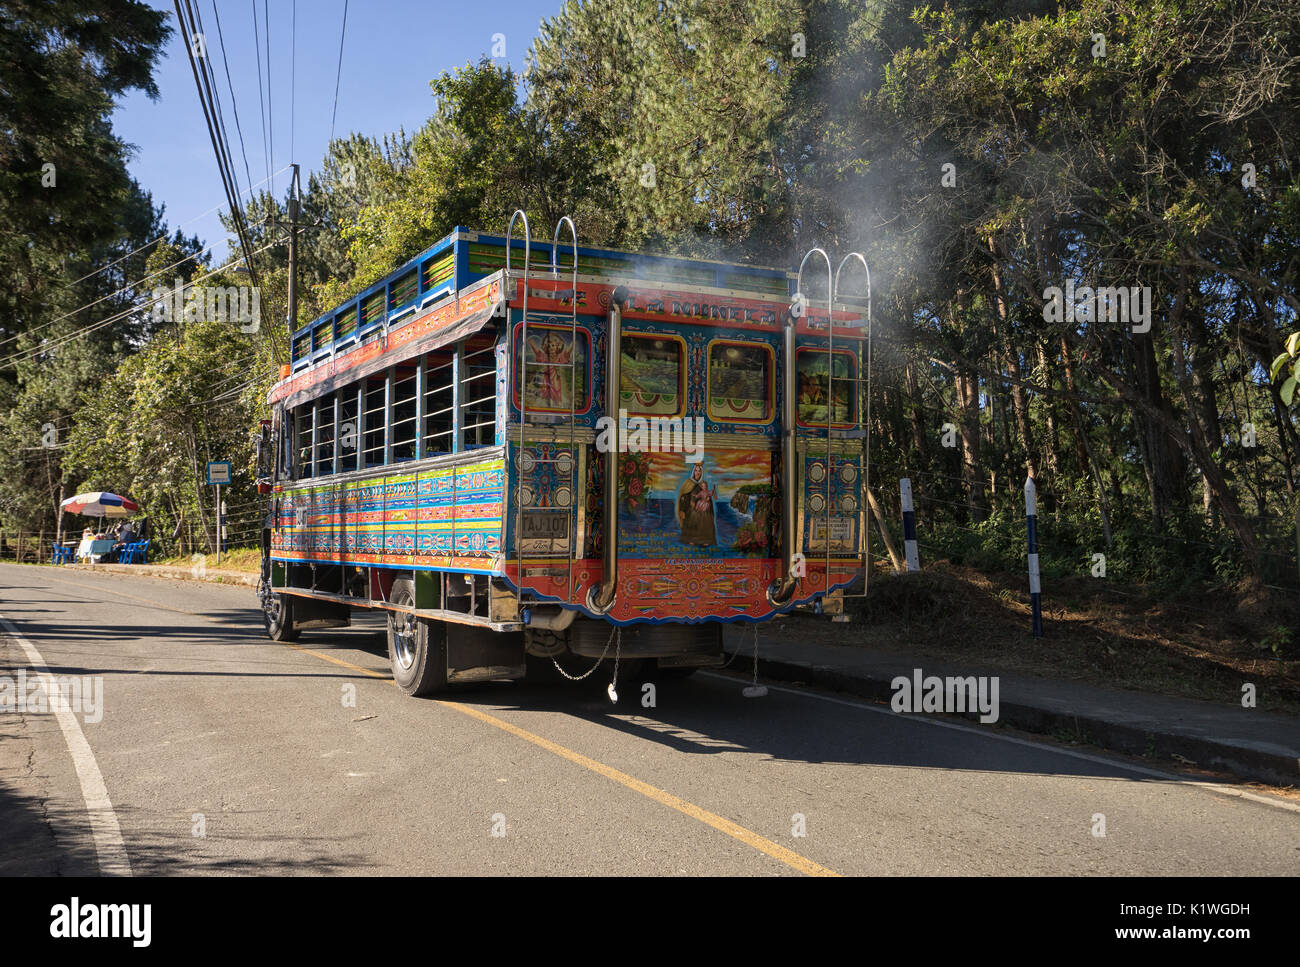 August 6, 2017 Medellin, Colombia: a colourful od bus called 'chiva' emiting high level of polution driving through a closeby park Stock Photo